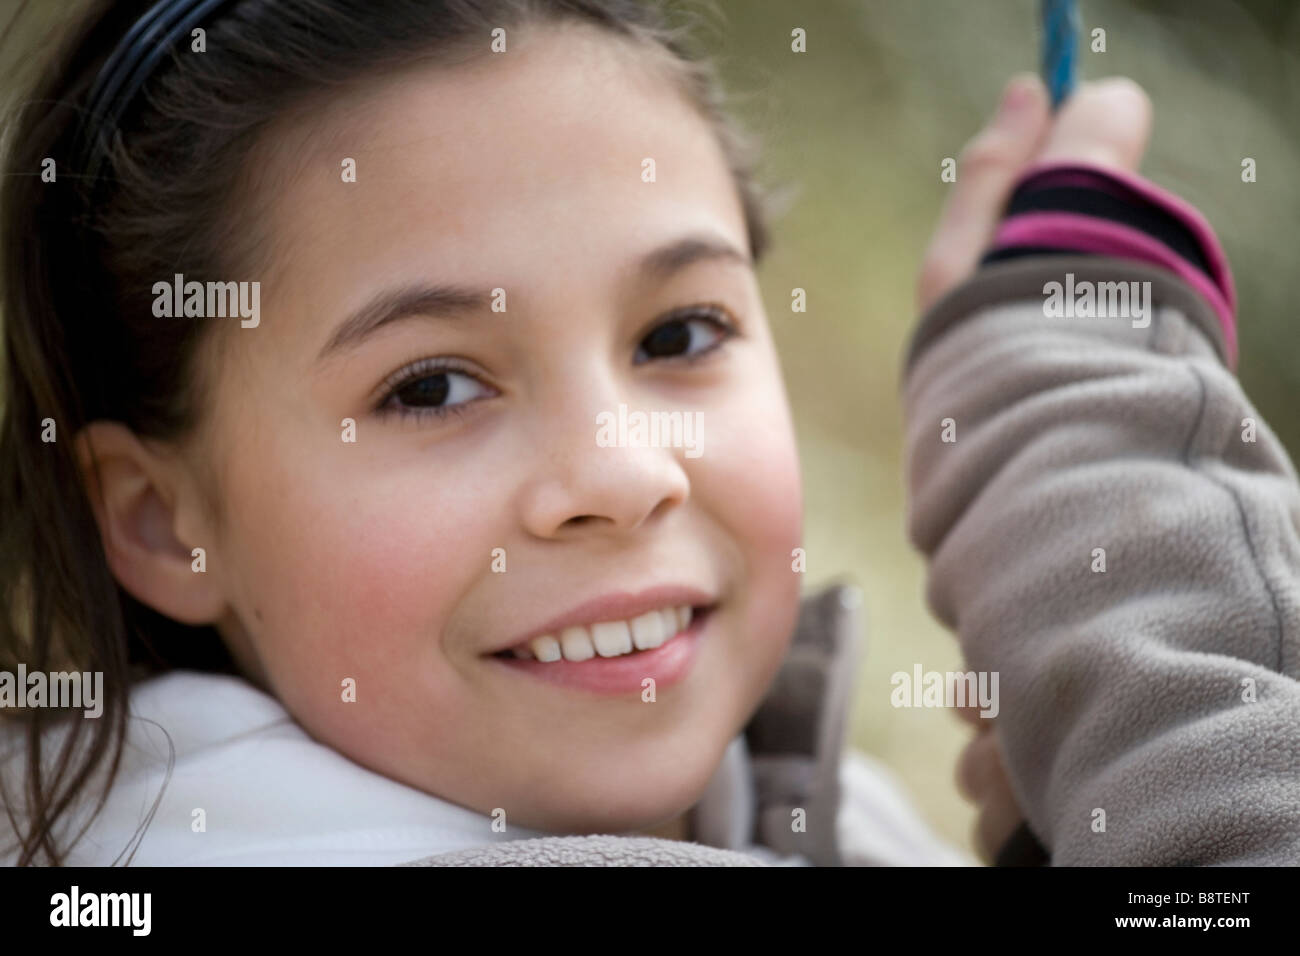 Child Fun Girl Happy Kid Smile Smiling Swing Young Stock Photo